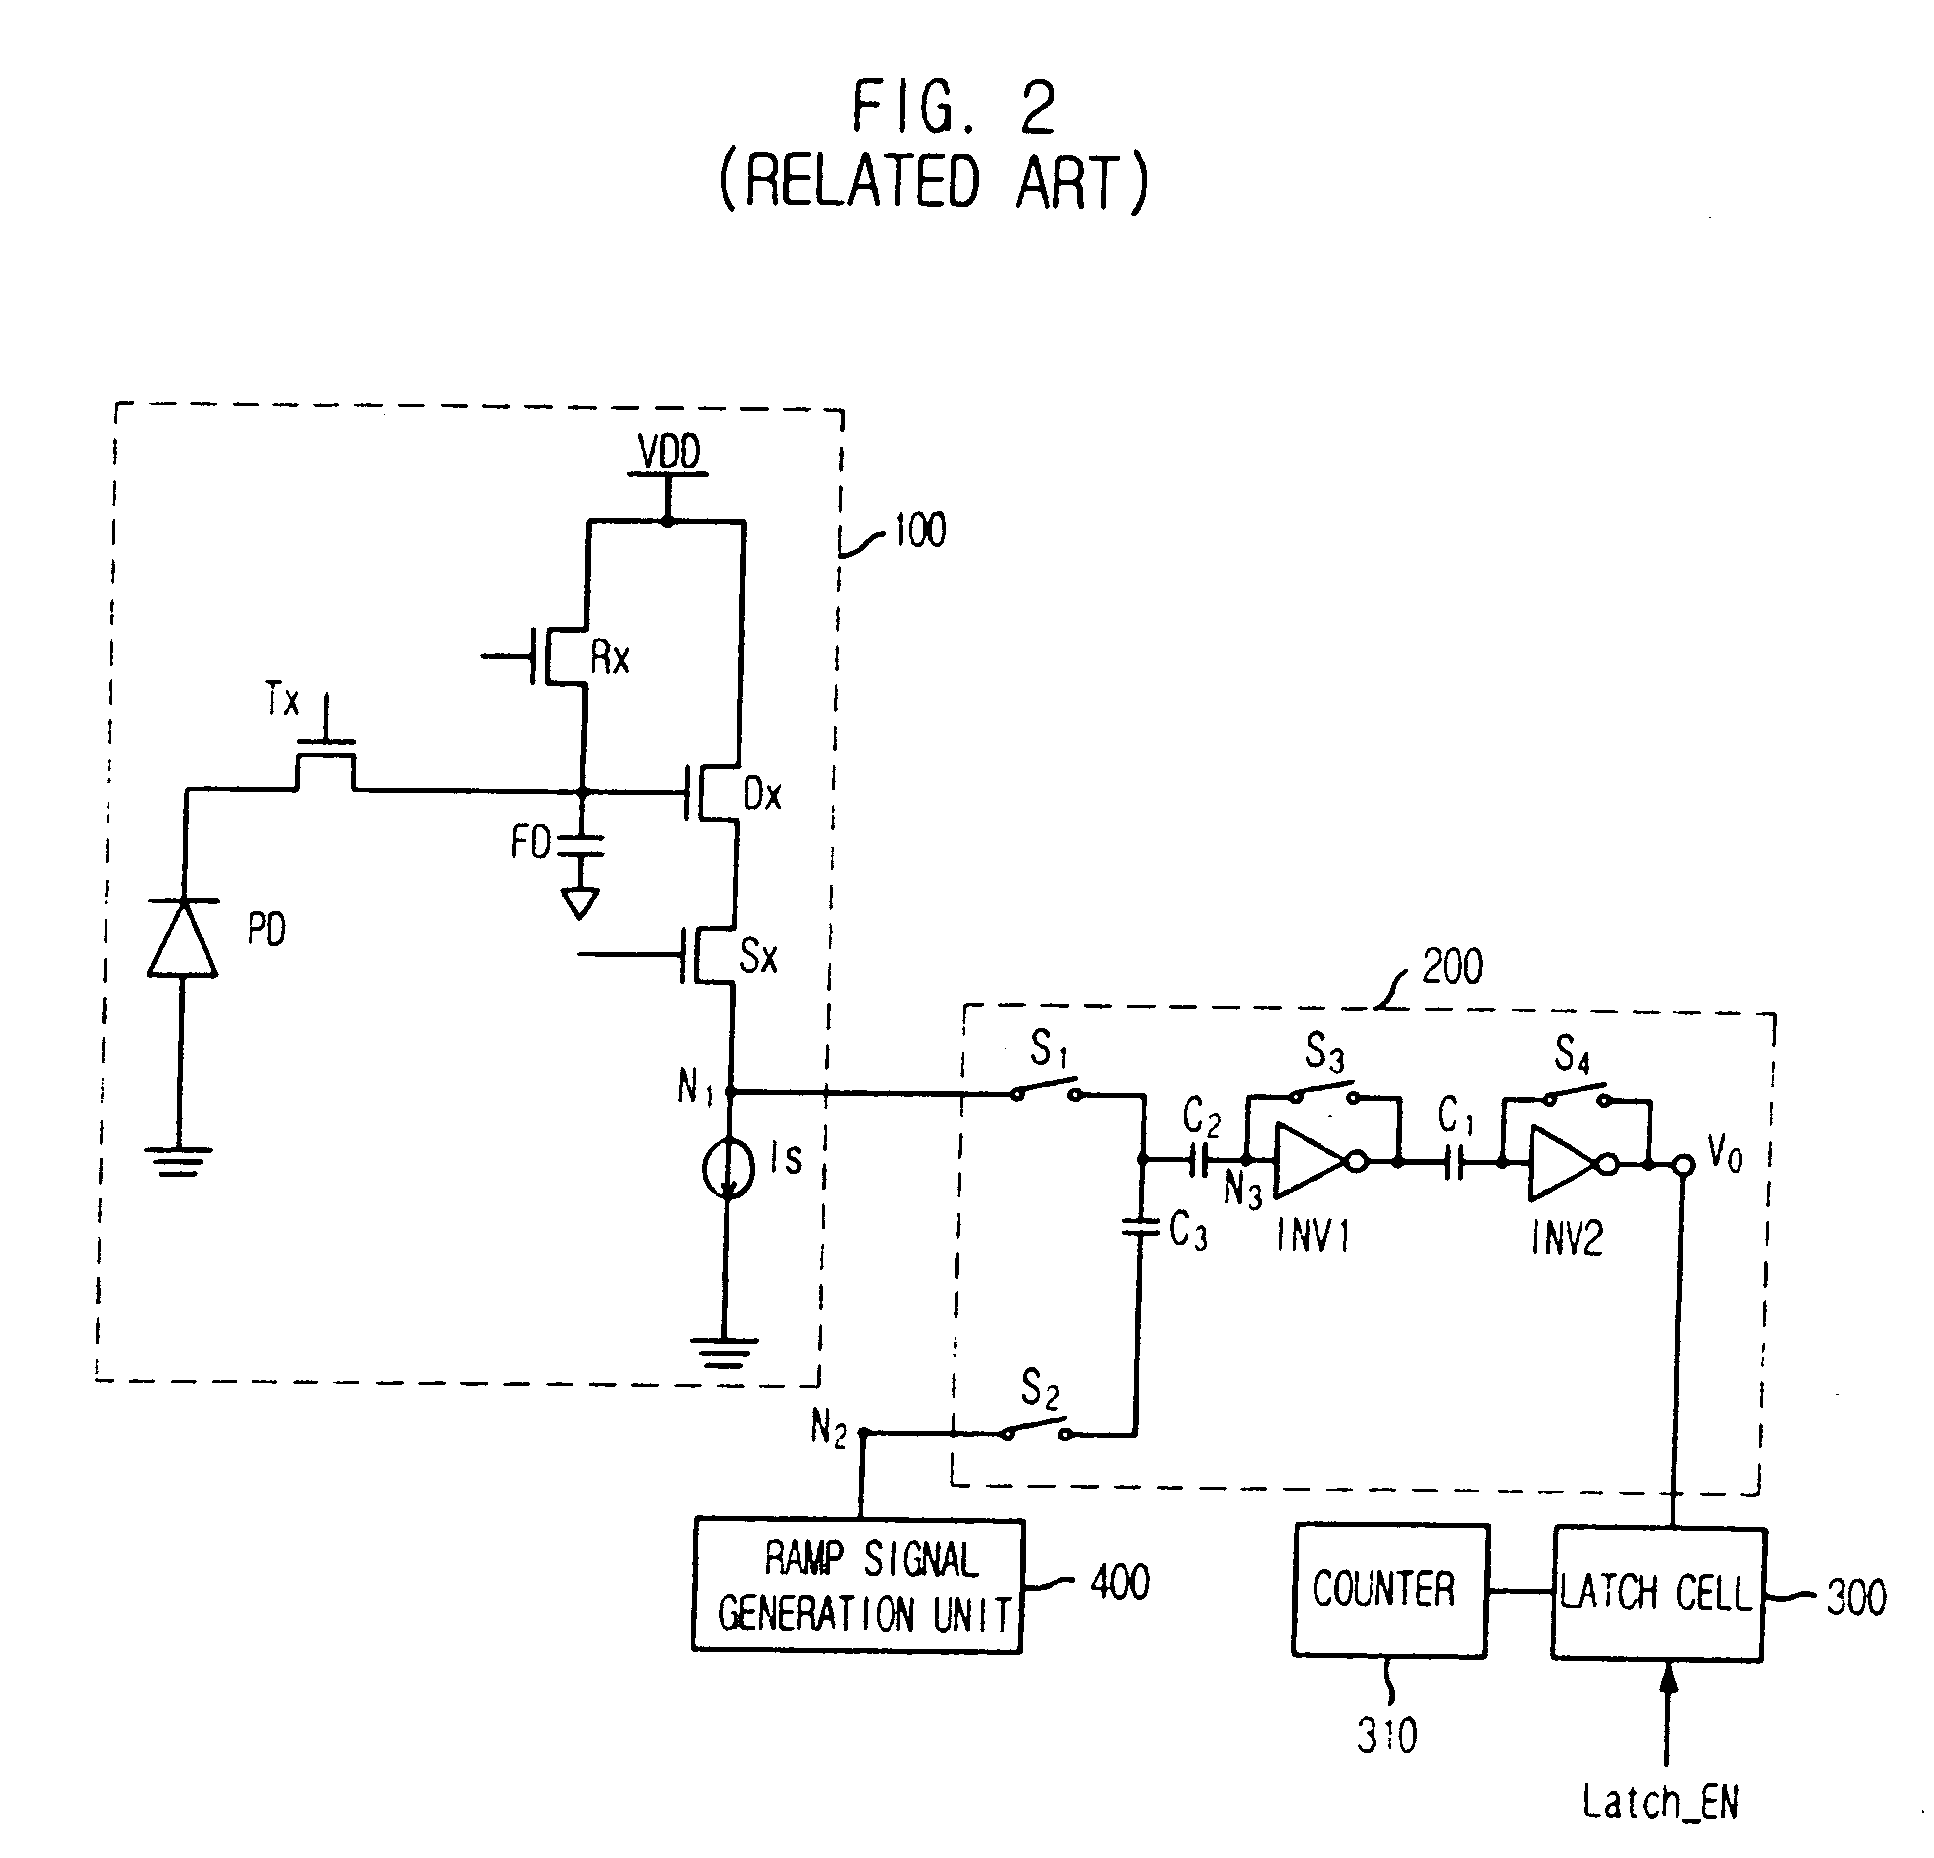 CMOS image sensor capable of performing analog correlated double sampling